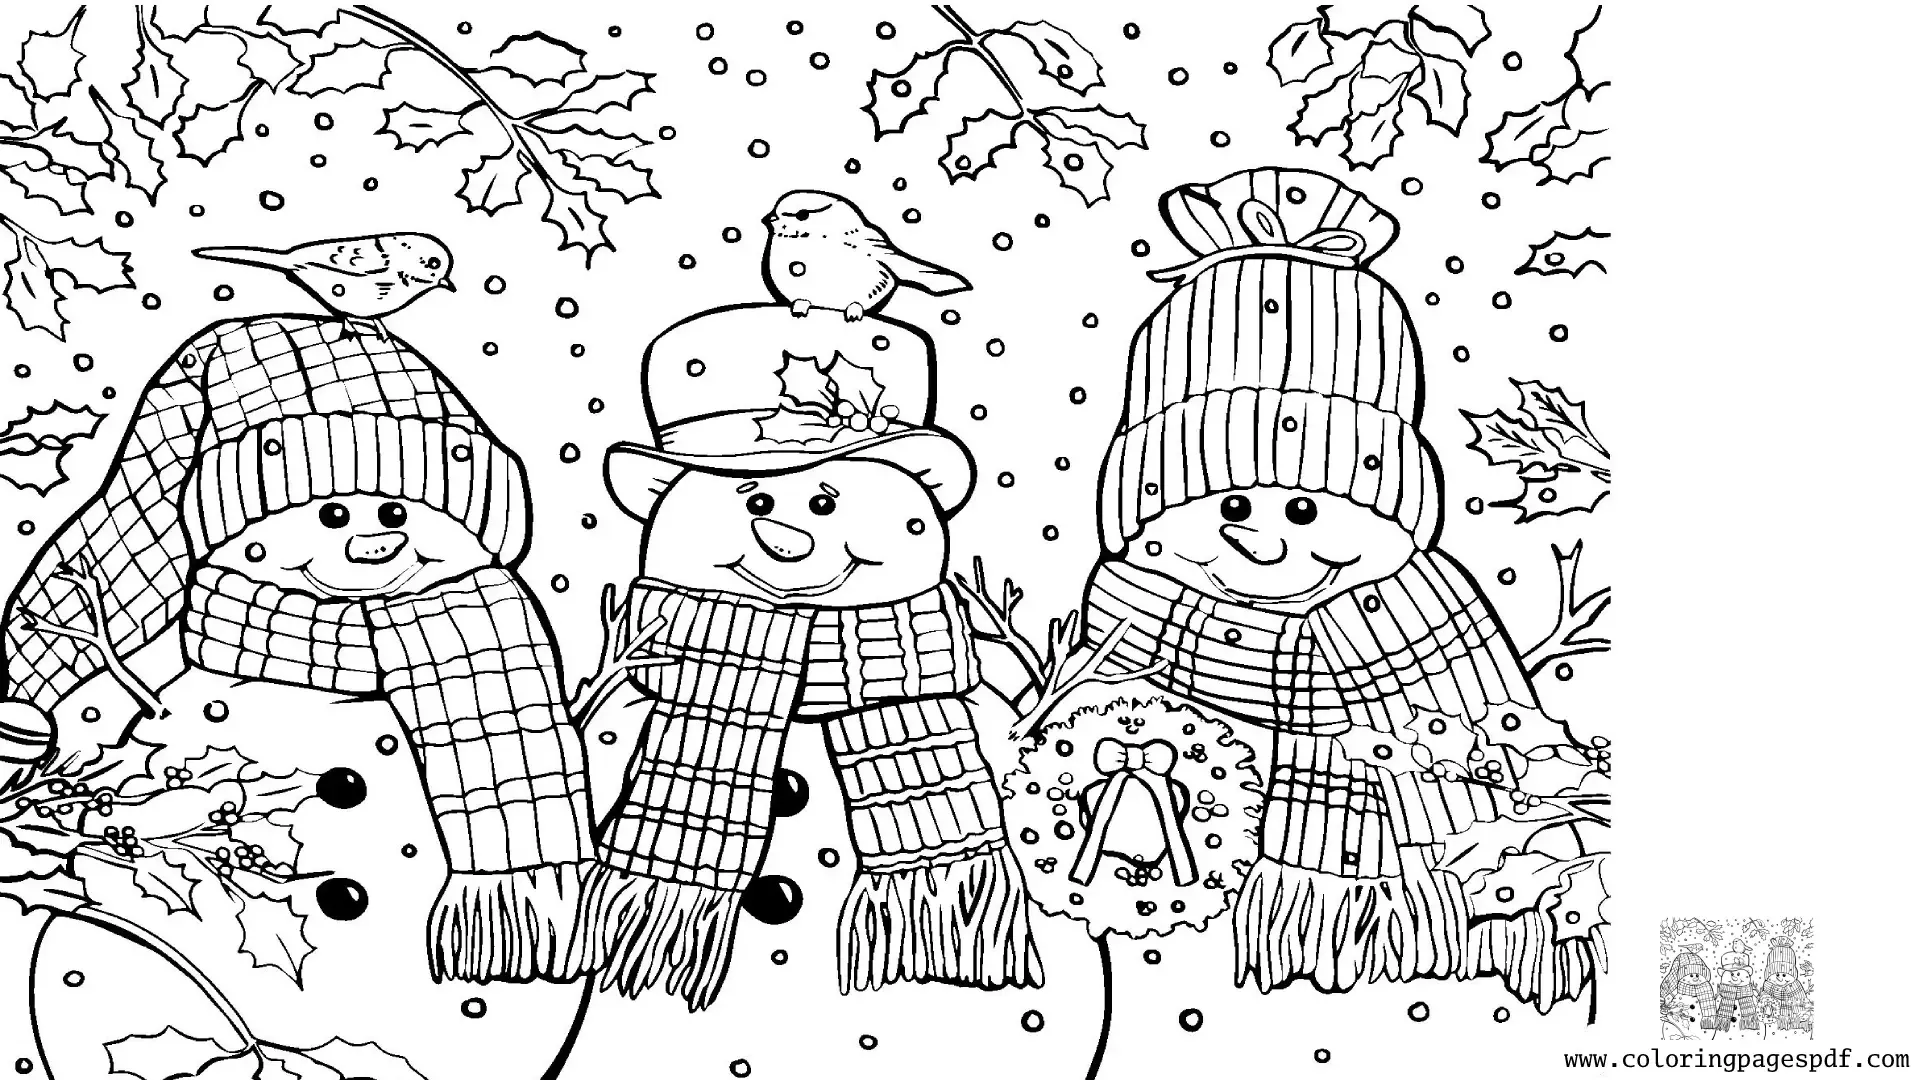 Coloring Page Of Three Snowmen